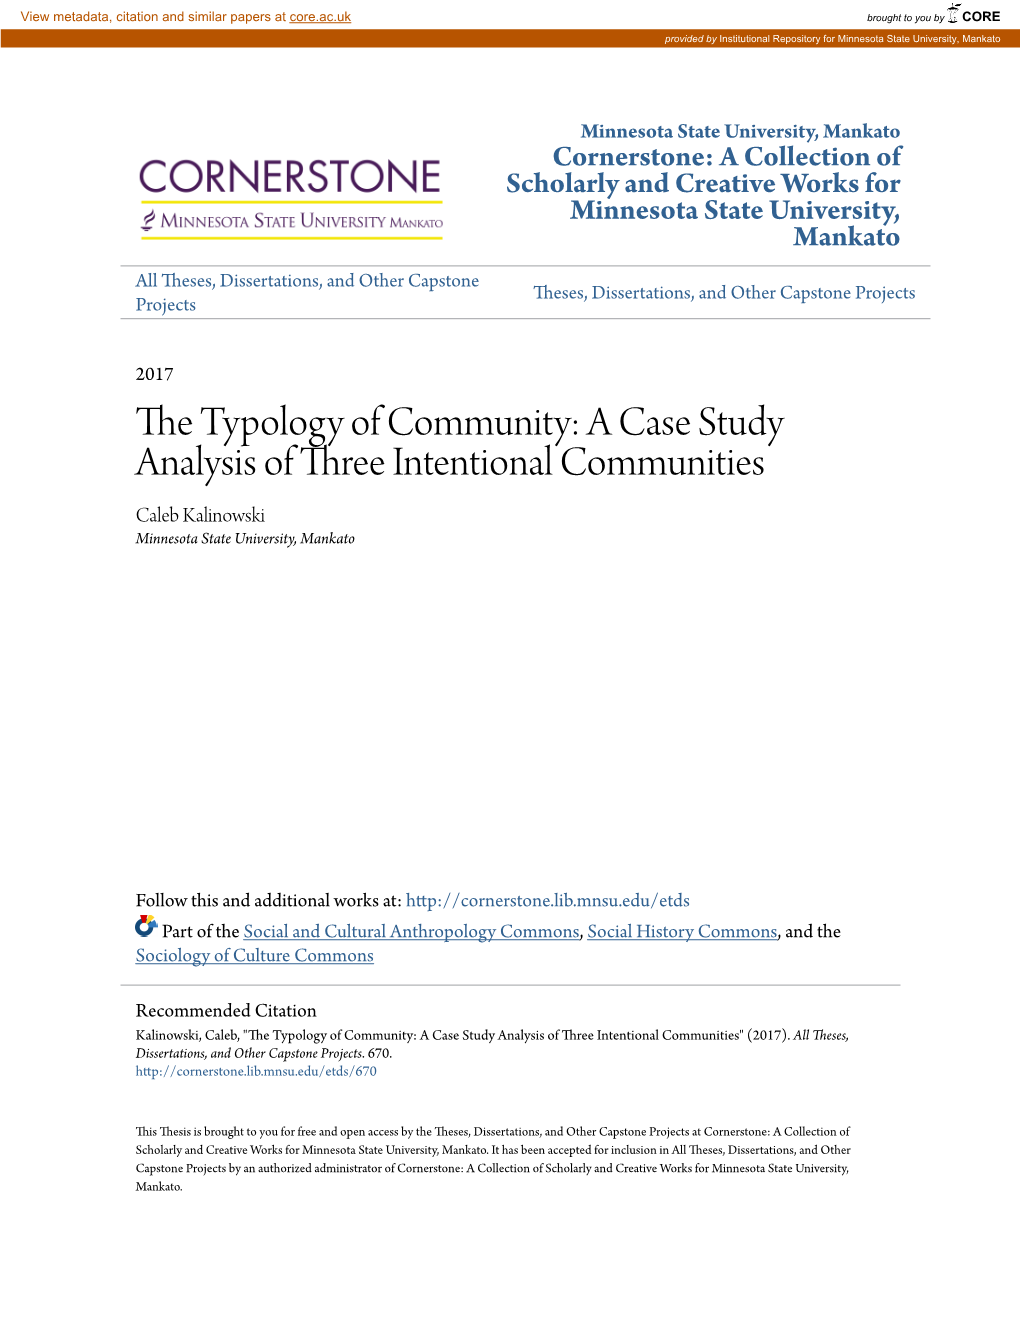 The Typology of Community: a Case Study Analysis of Three Intentional Communities